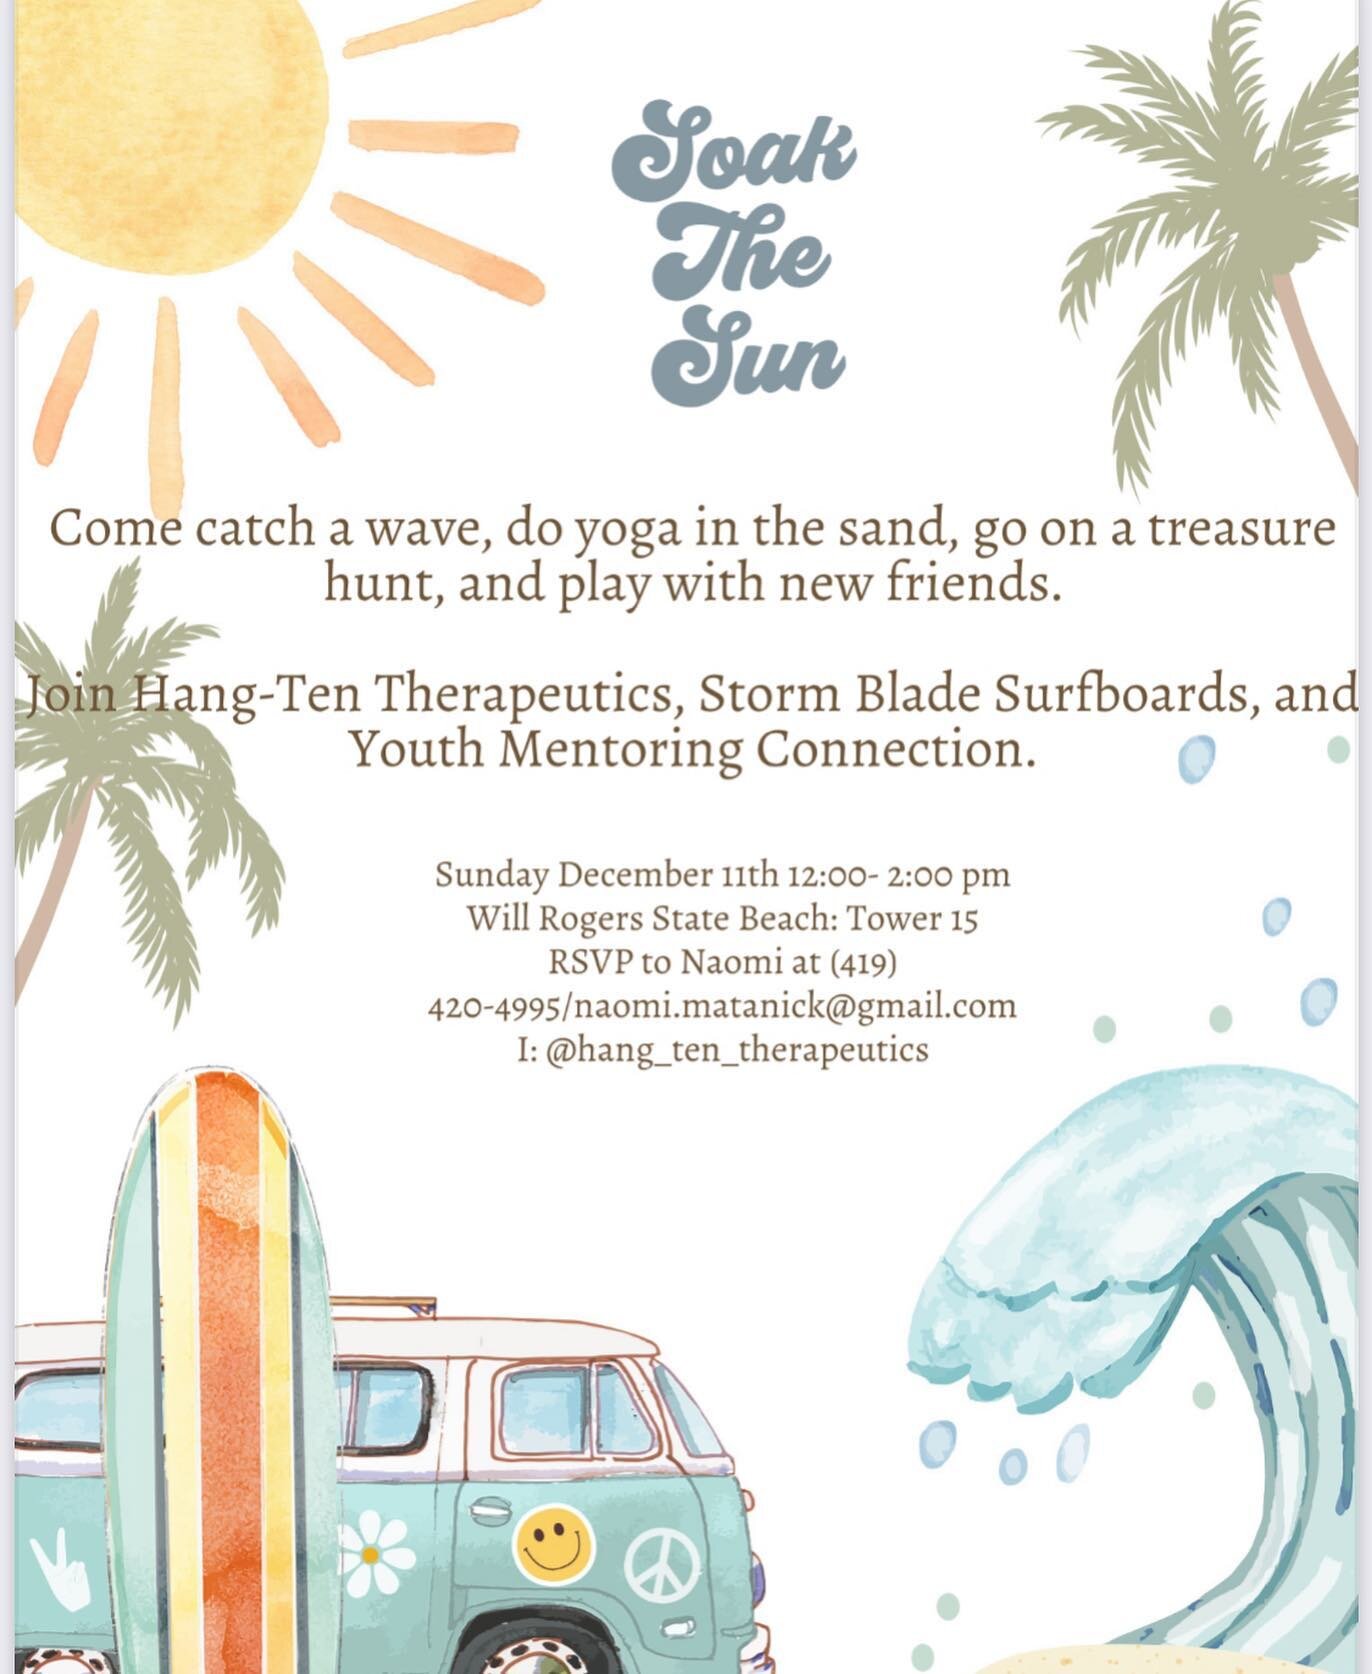 @hang_ten_therapeutics is putting on a super fun event 🏄! Naomi is the whole package: an awesome OT + rad surfer 😎. Check it out at Will Rogers on December 11th!!

#la #surflife #occupationaltherapy